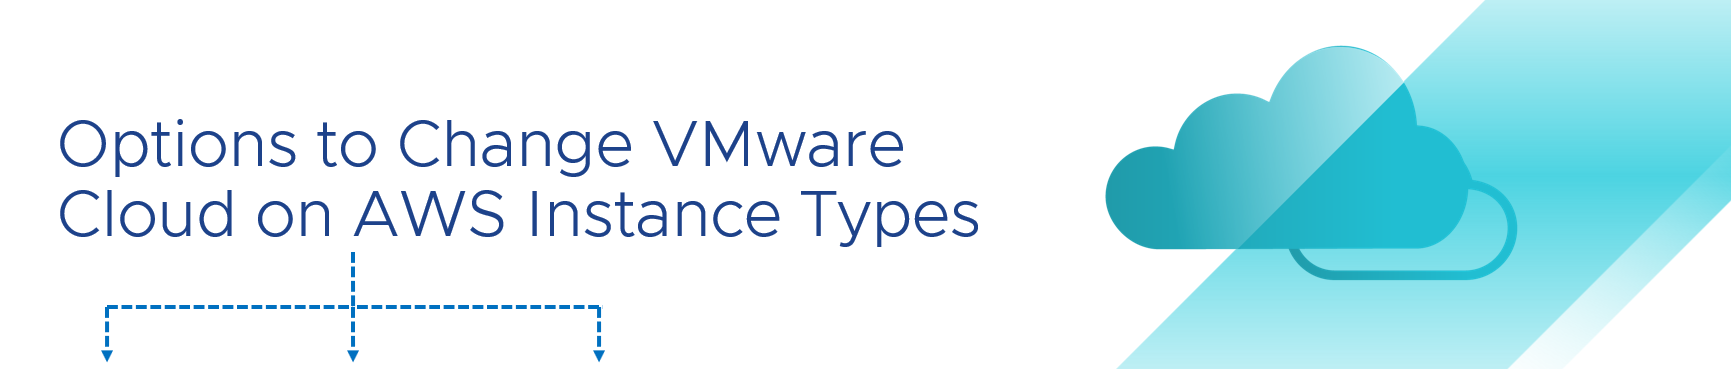 How to change your VMware Cloud on AWS instance type?